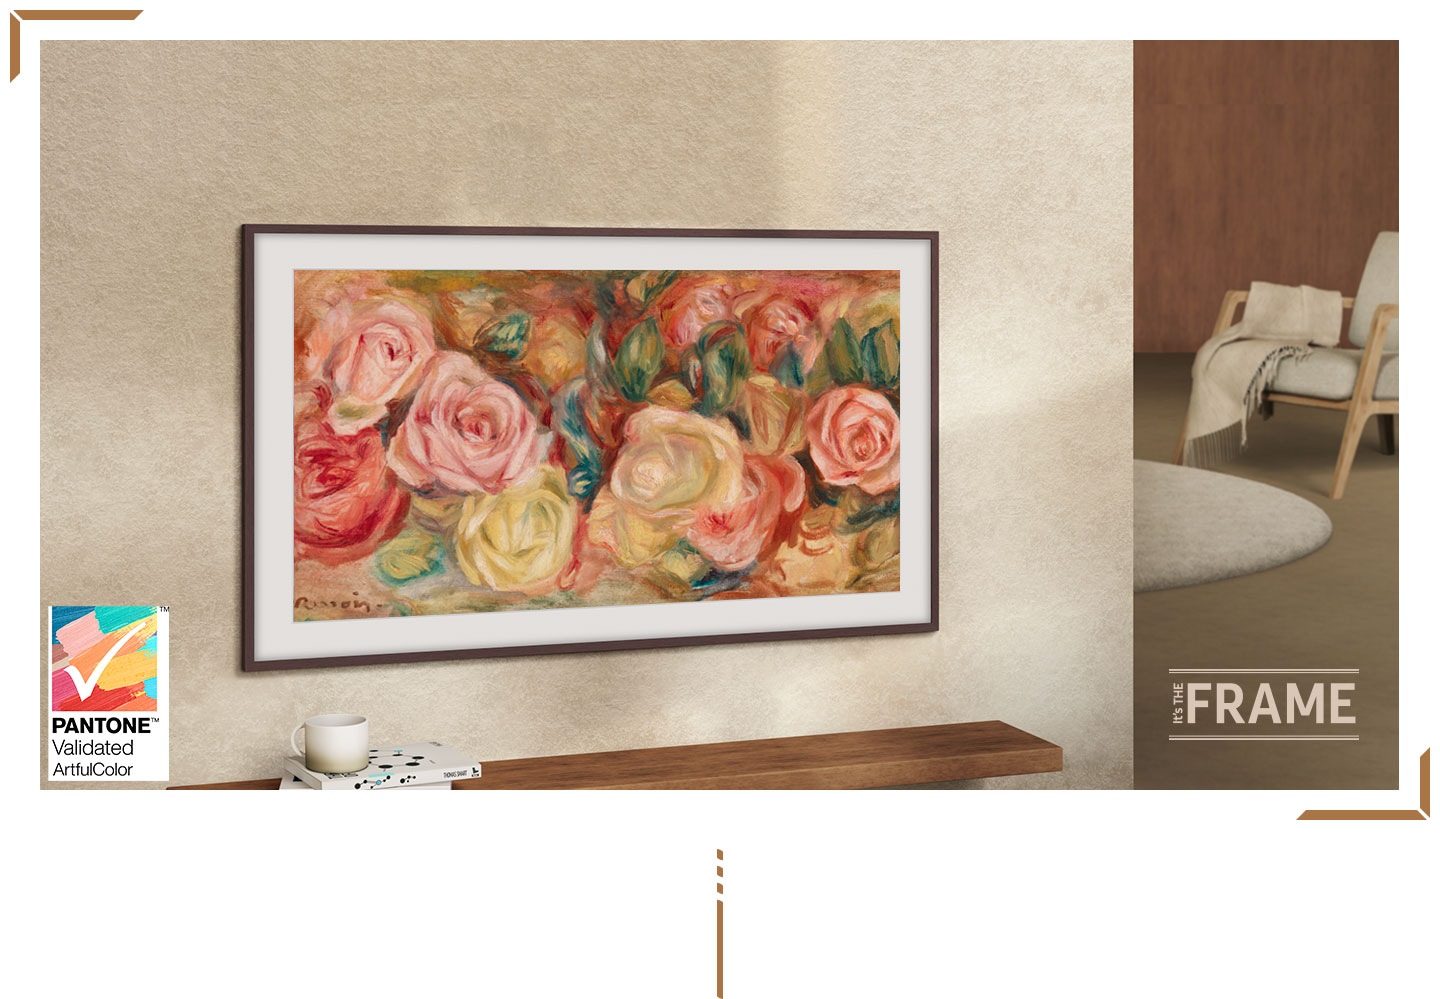 The Frame TV is set on a wall. The screen shows a painting of roses. A logo reads It's The Frame and the PANTONE Validated certification stamp.